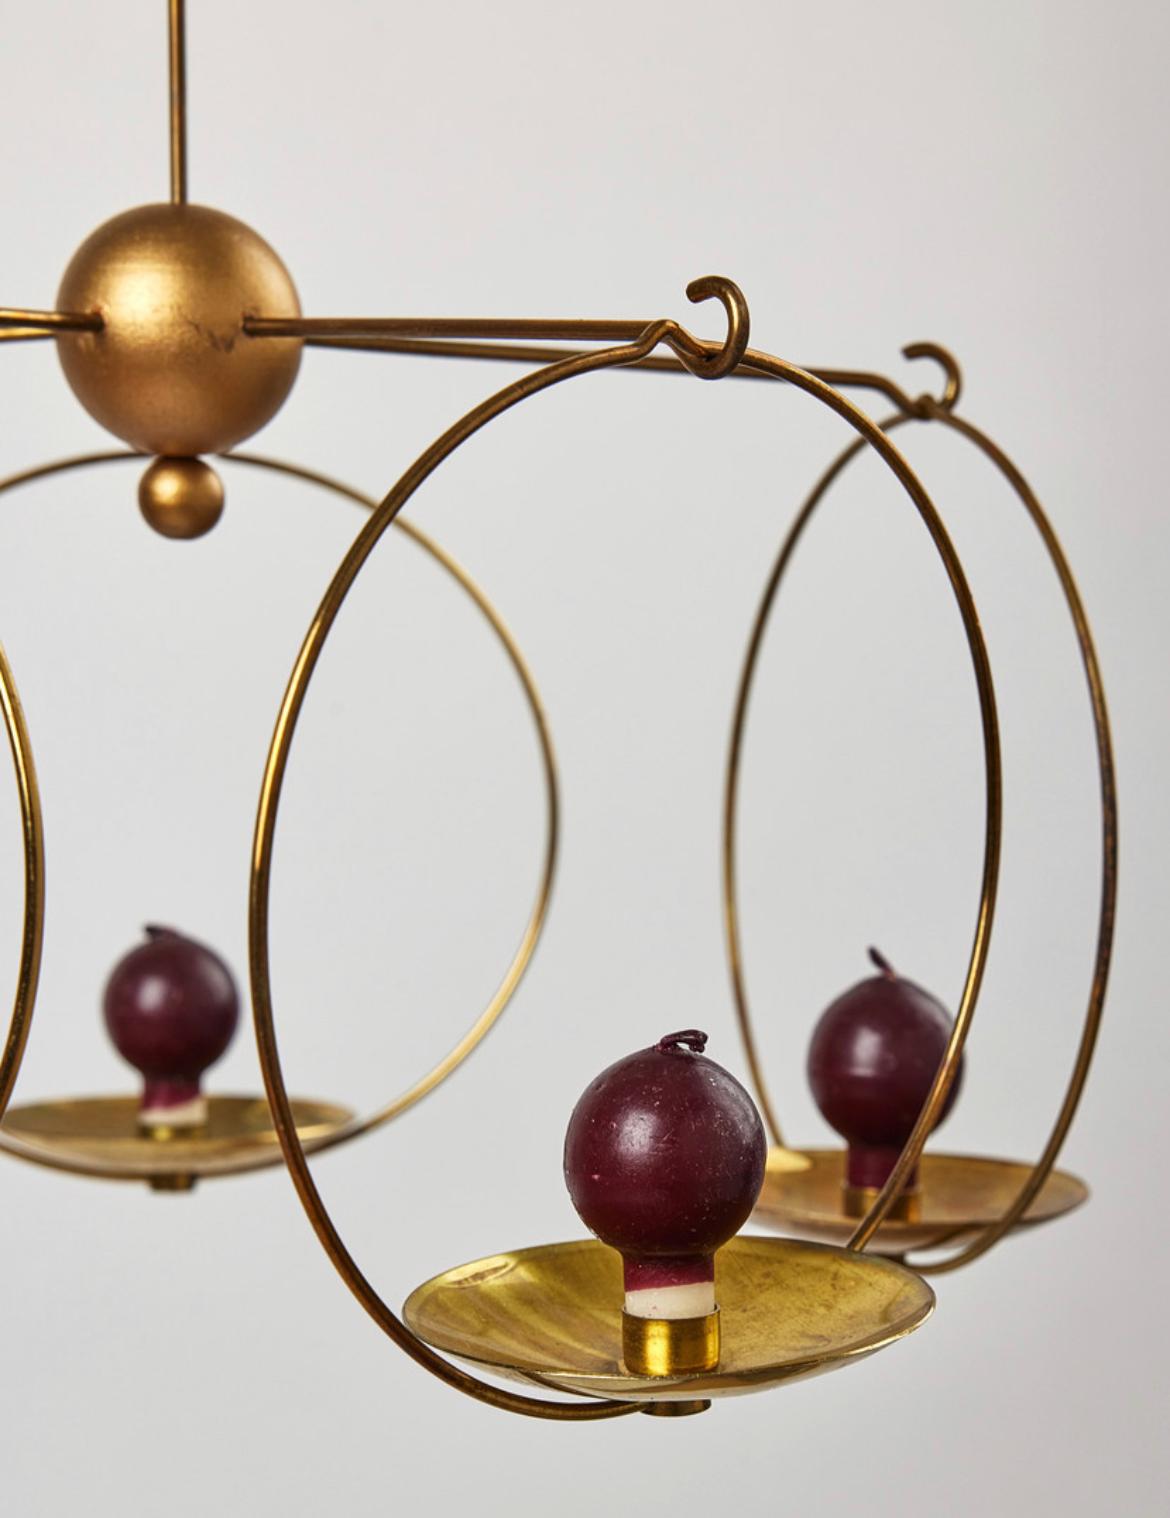 Rare and uncommon pair of Kaija Aarikk & Timo Sarpaneva brass chandeliers for candles made in Finland in the 1950’s.

This pair of chandeliers will add a warm charming touch to your home.
The chandeliers are the perfect detail for any style of